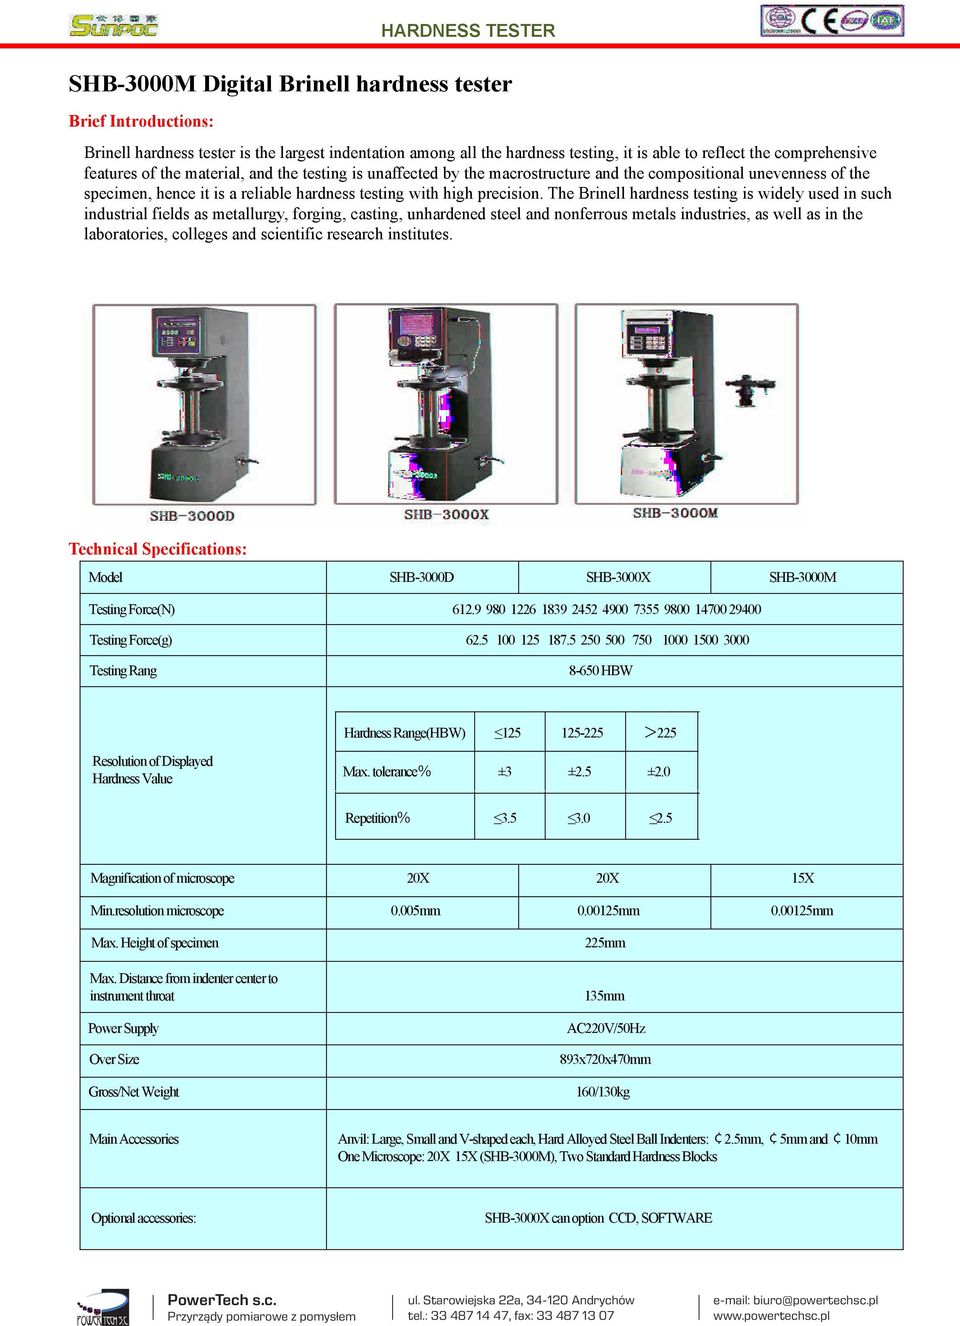 The Brinell hardness testing is widely used in such industrial fields as metallurgy, forging, casting, unhardened steel and nonferrous metals industries, as well as in the laboratories, colleges and